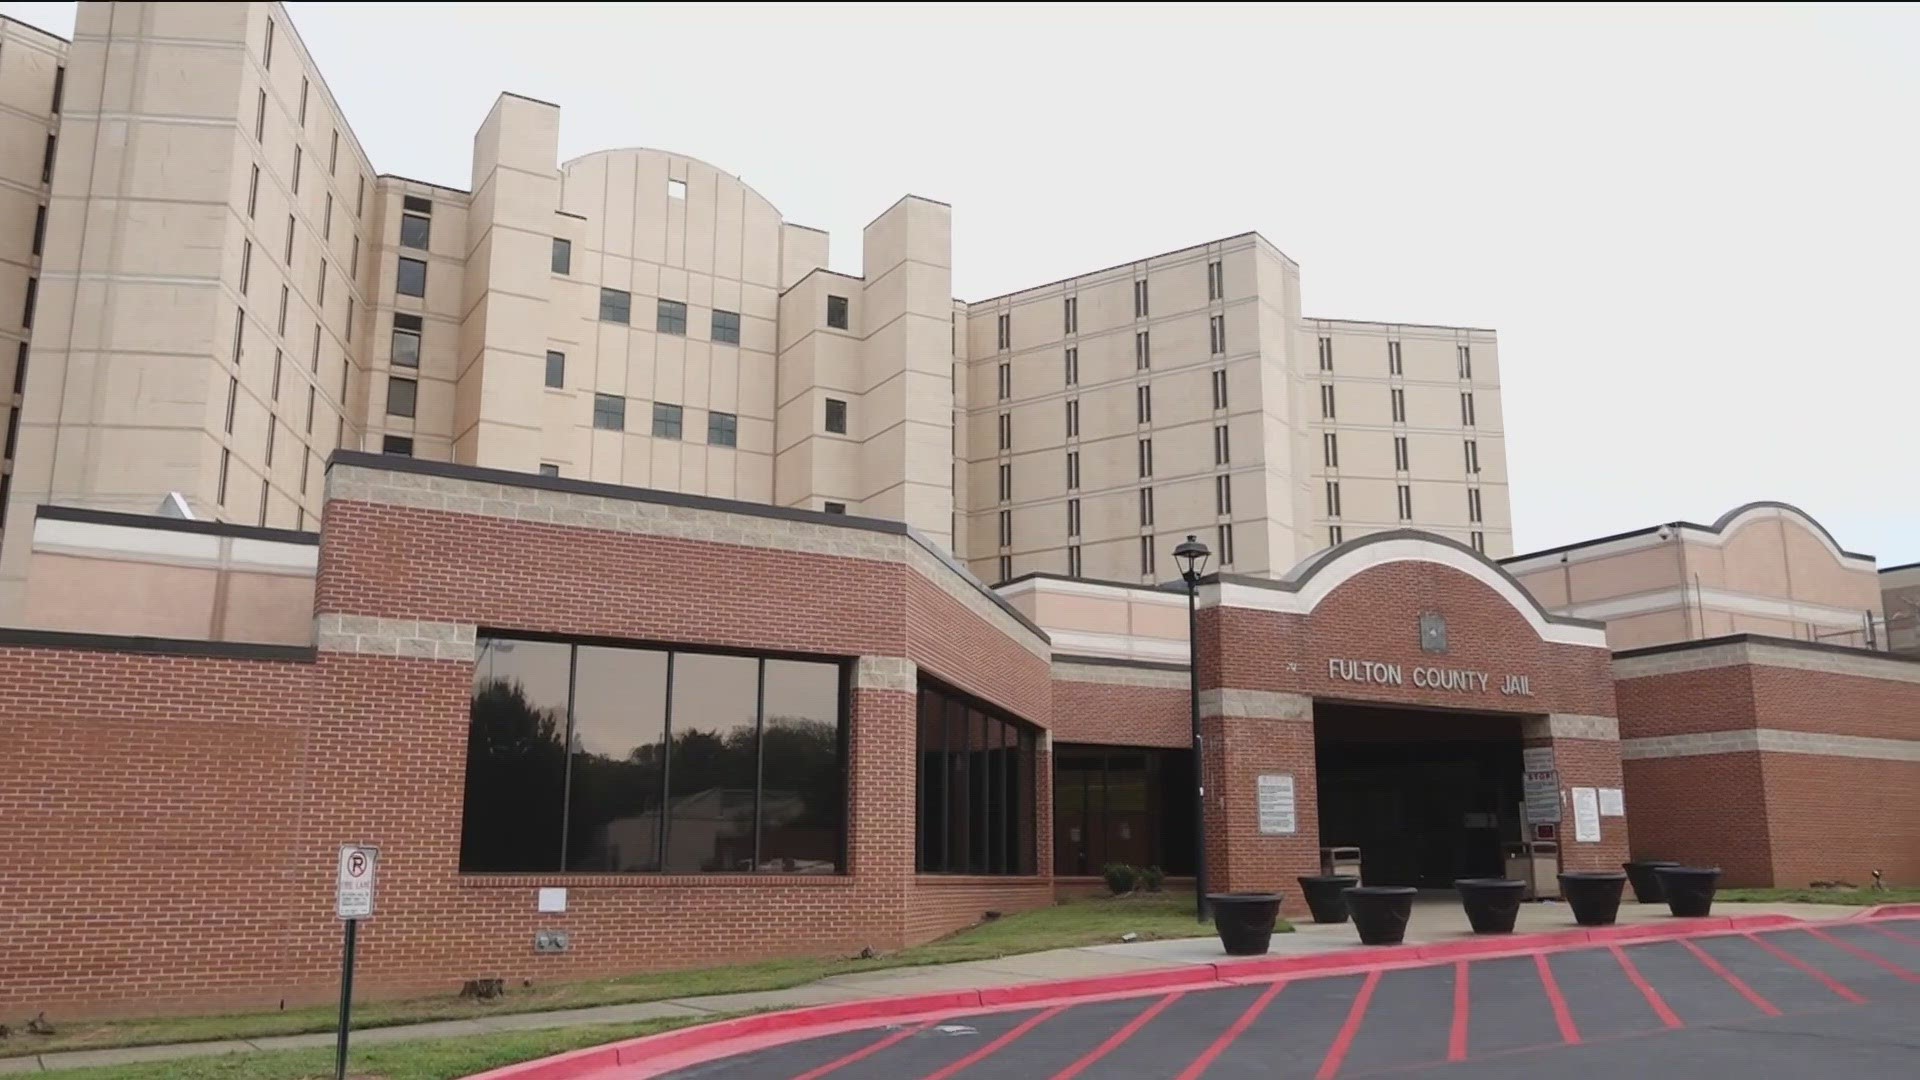 Six arrests have been made after a contraband investigation at the Fulton County Jail, the sheriff's office announced Friday.